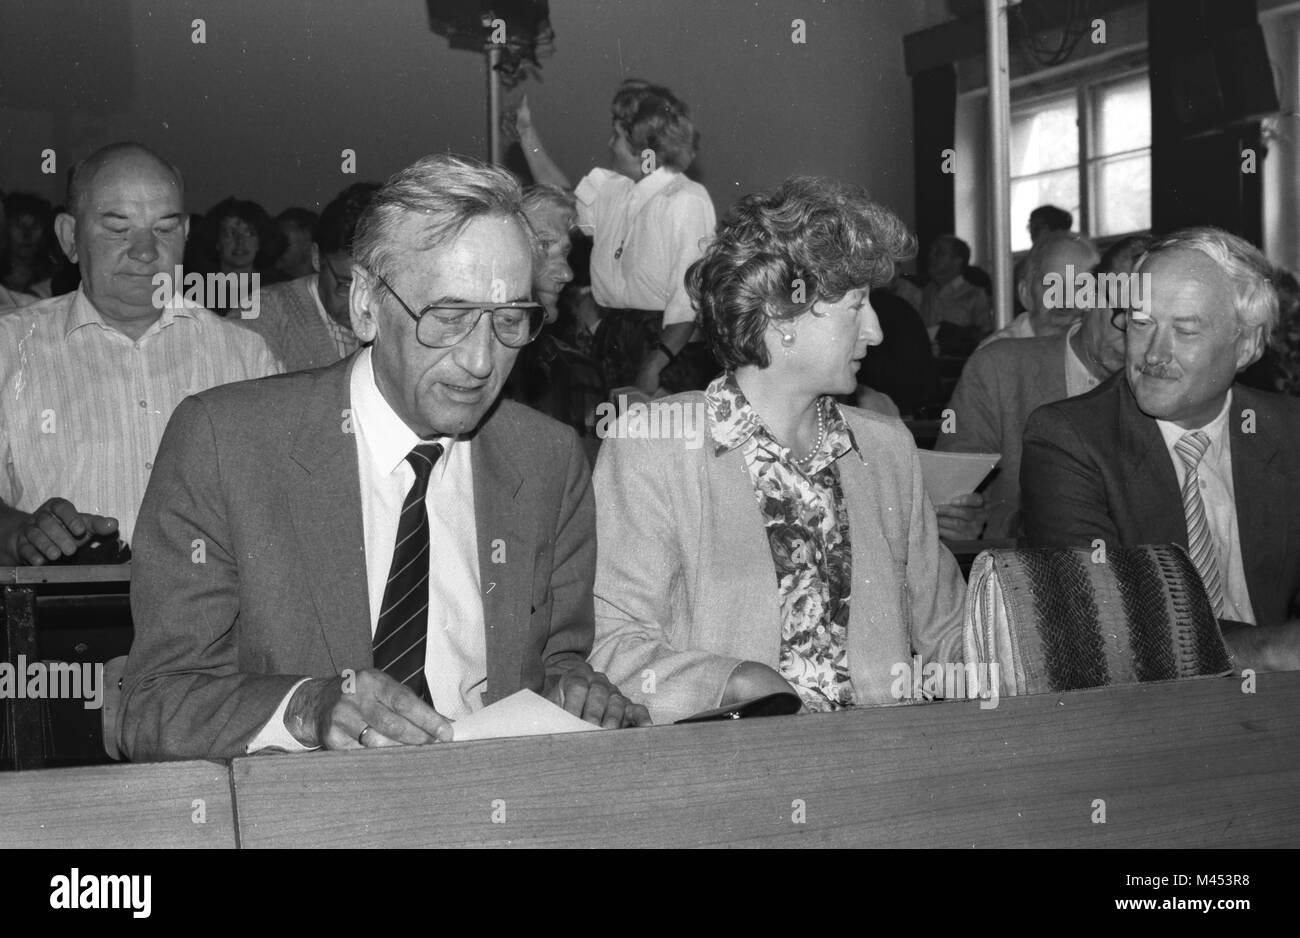 Tadeusz Mazowiecki and Hanna Suchocka, both were former polish prime ministers, icons of the Solidarity in Poland. Meeting in Poznan. Stock Photo